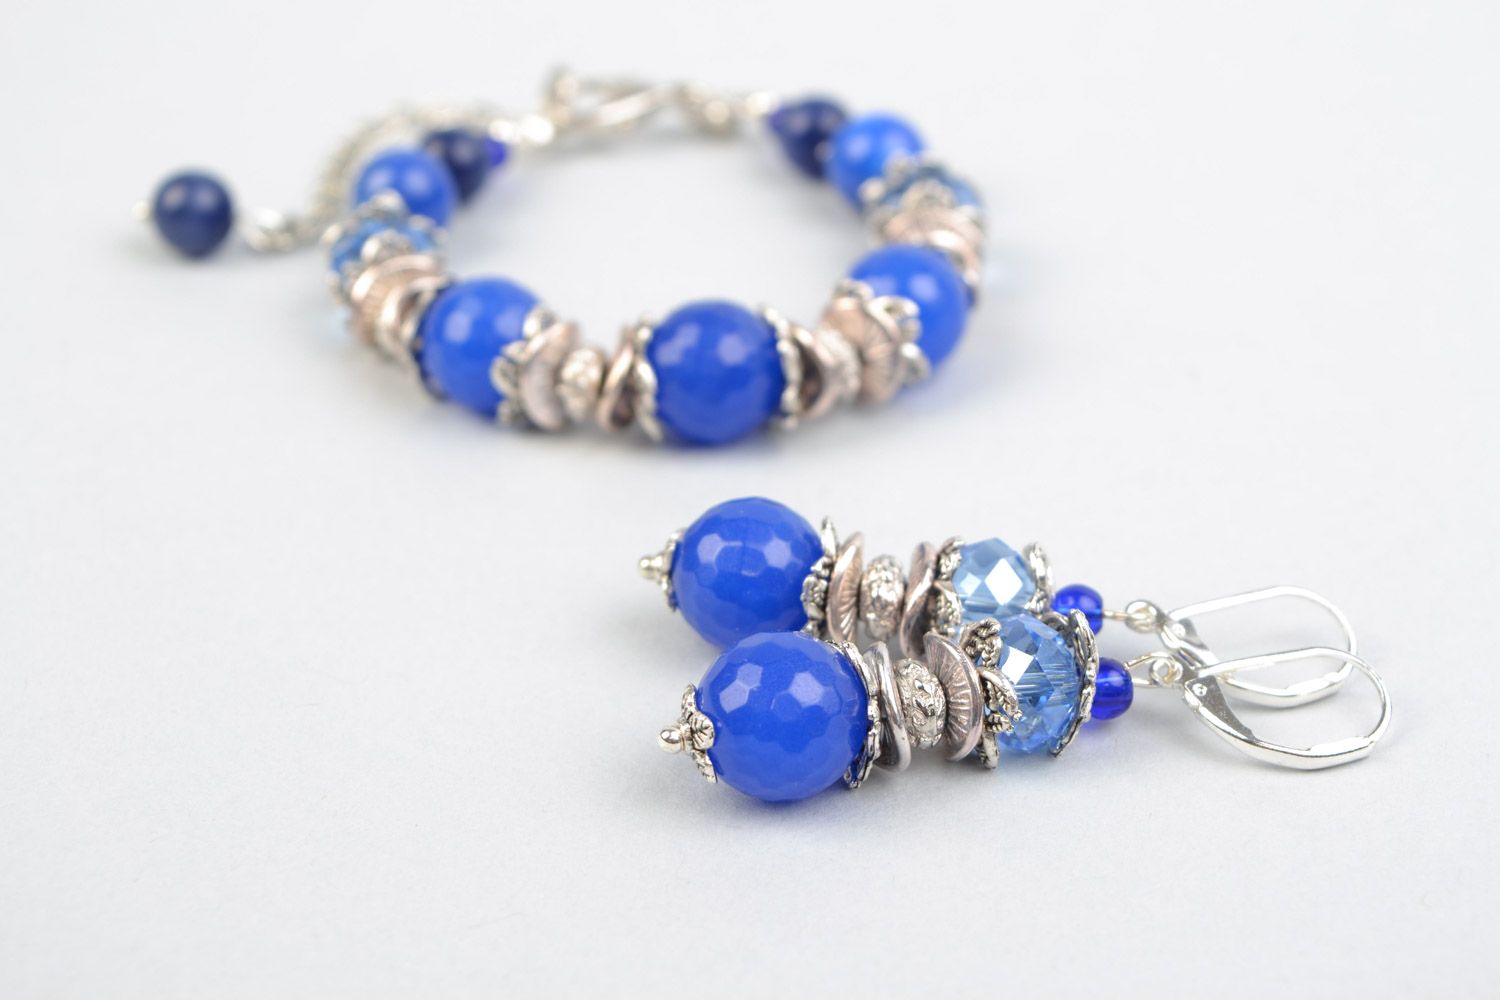 Handmade jewelry set with agate and glass beads in blue color earrings and bracelet photo 3